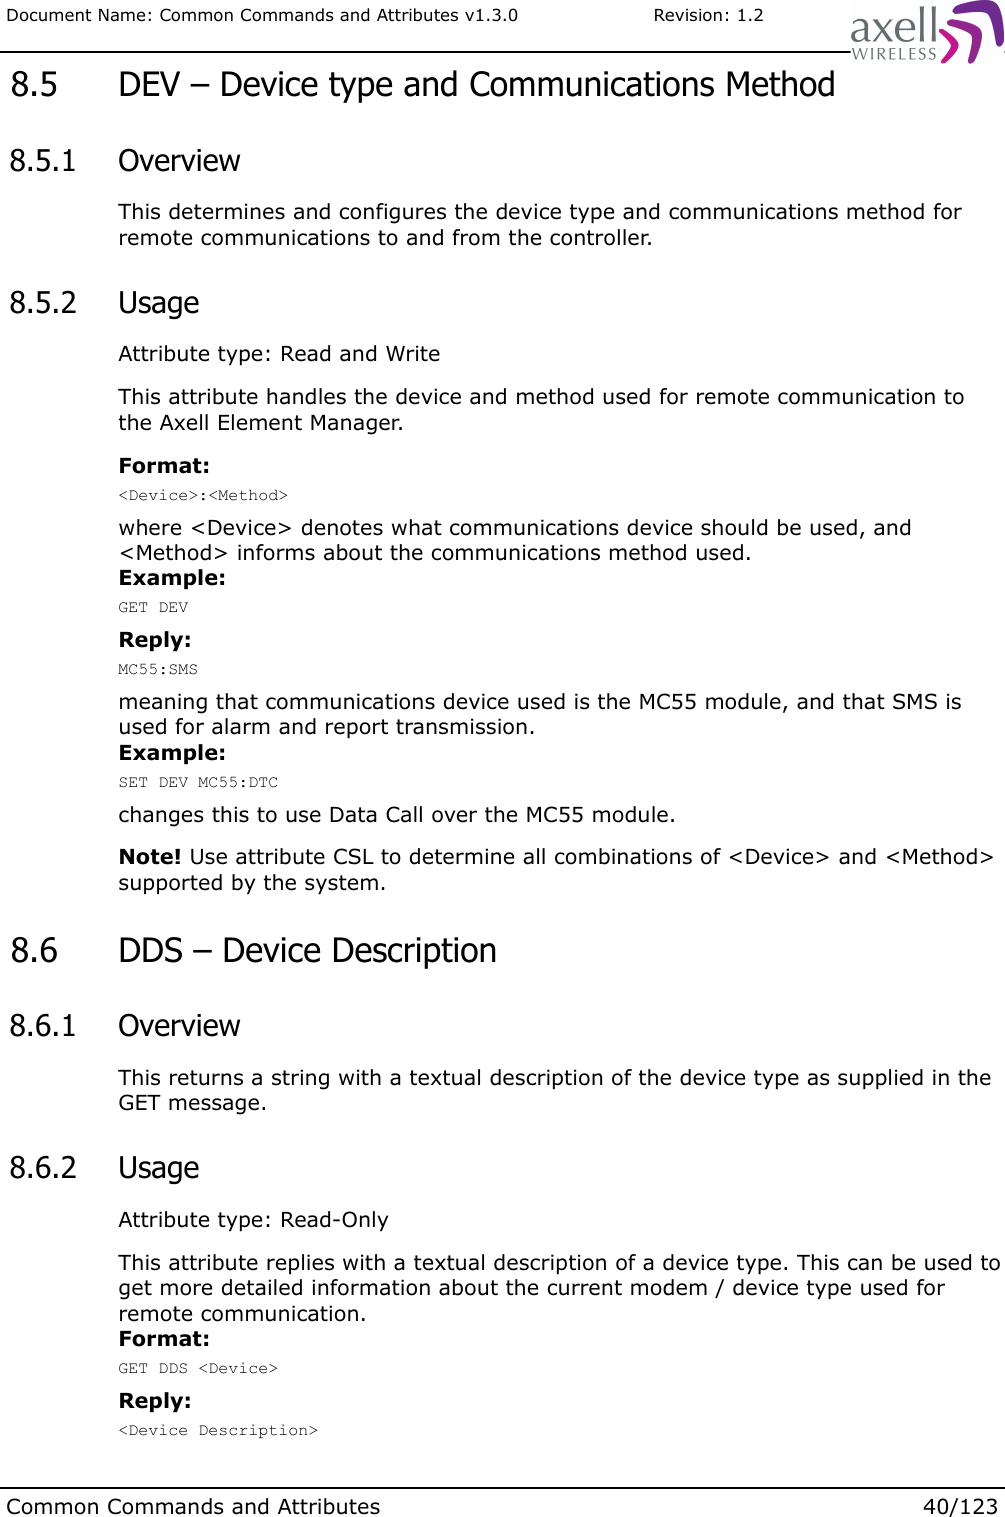 Document Name: Common Commands and Attributes v1.3.0                       Revision: 1.2 8.5  DEV – Device type and Communications Method 8.5.1  OverviewThis determines and configures the device type and communications method for remote communications to and from the controller. 8.5.2  UsageAttribute type: Read and WriteThis attribute handles the device and method used for remote communication to the Axell Element Manager.Format:&lt;Device&gt;:&lt;Method&gt;where &lt;Device&gt; denotes what communications device should be used, and &lt;Method&gt; informs about the communications method used. Example:GET DEVReply:MC55:SMSmeaning that communications device used is the MC55 module, and that SMS is used for alarm and report transmission.Example:SET DEV MC55:DTCchanges this to use Data Call over the MC55 module.Note! Use attribute CSL to determine all combinations of &lt;Device&gt; and &lt;Method&gt; supported by the system. 8.6  DDS – Device Description 8.6.1  OverviewThis returns a string with a textual description of the device type as supplied in the GET message. 8.6.2  UsageAttribute type: Read-OnlyThis attribute replies with a textual description of a device type. This can be used to get more detailed information about the current modem / device type used for remote communication.Format:GET DDS &lt;Device&gt;Reply:&lt;Device Description&gt;Common Commands and Attributes 40/123